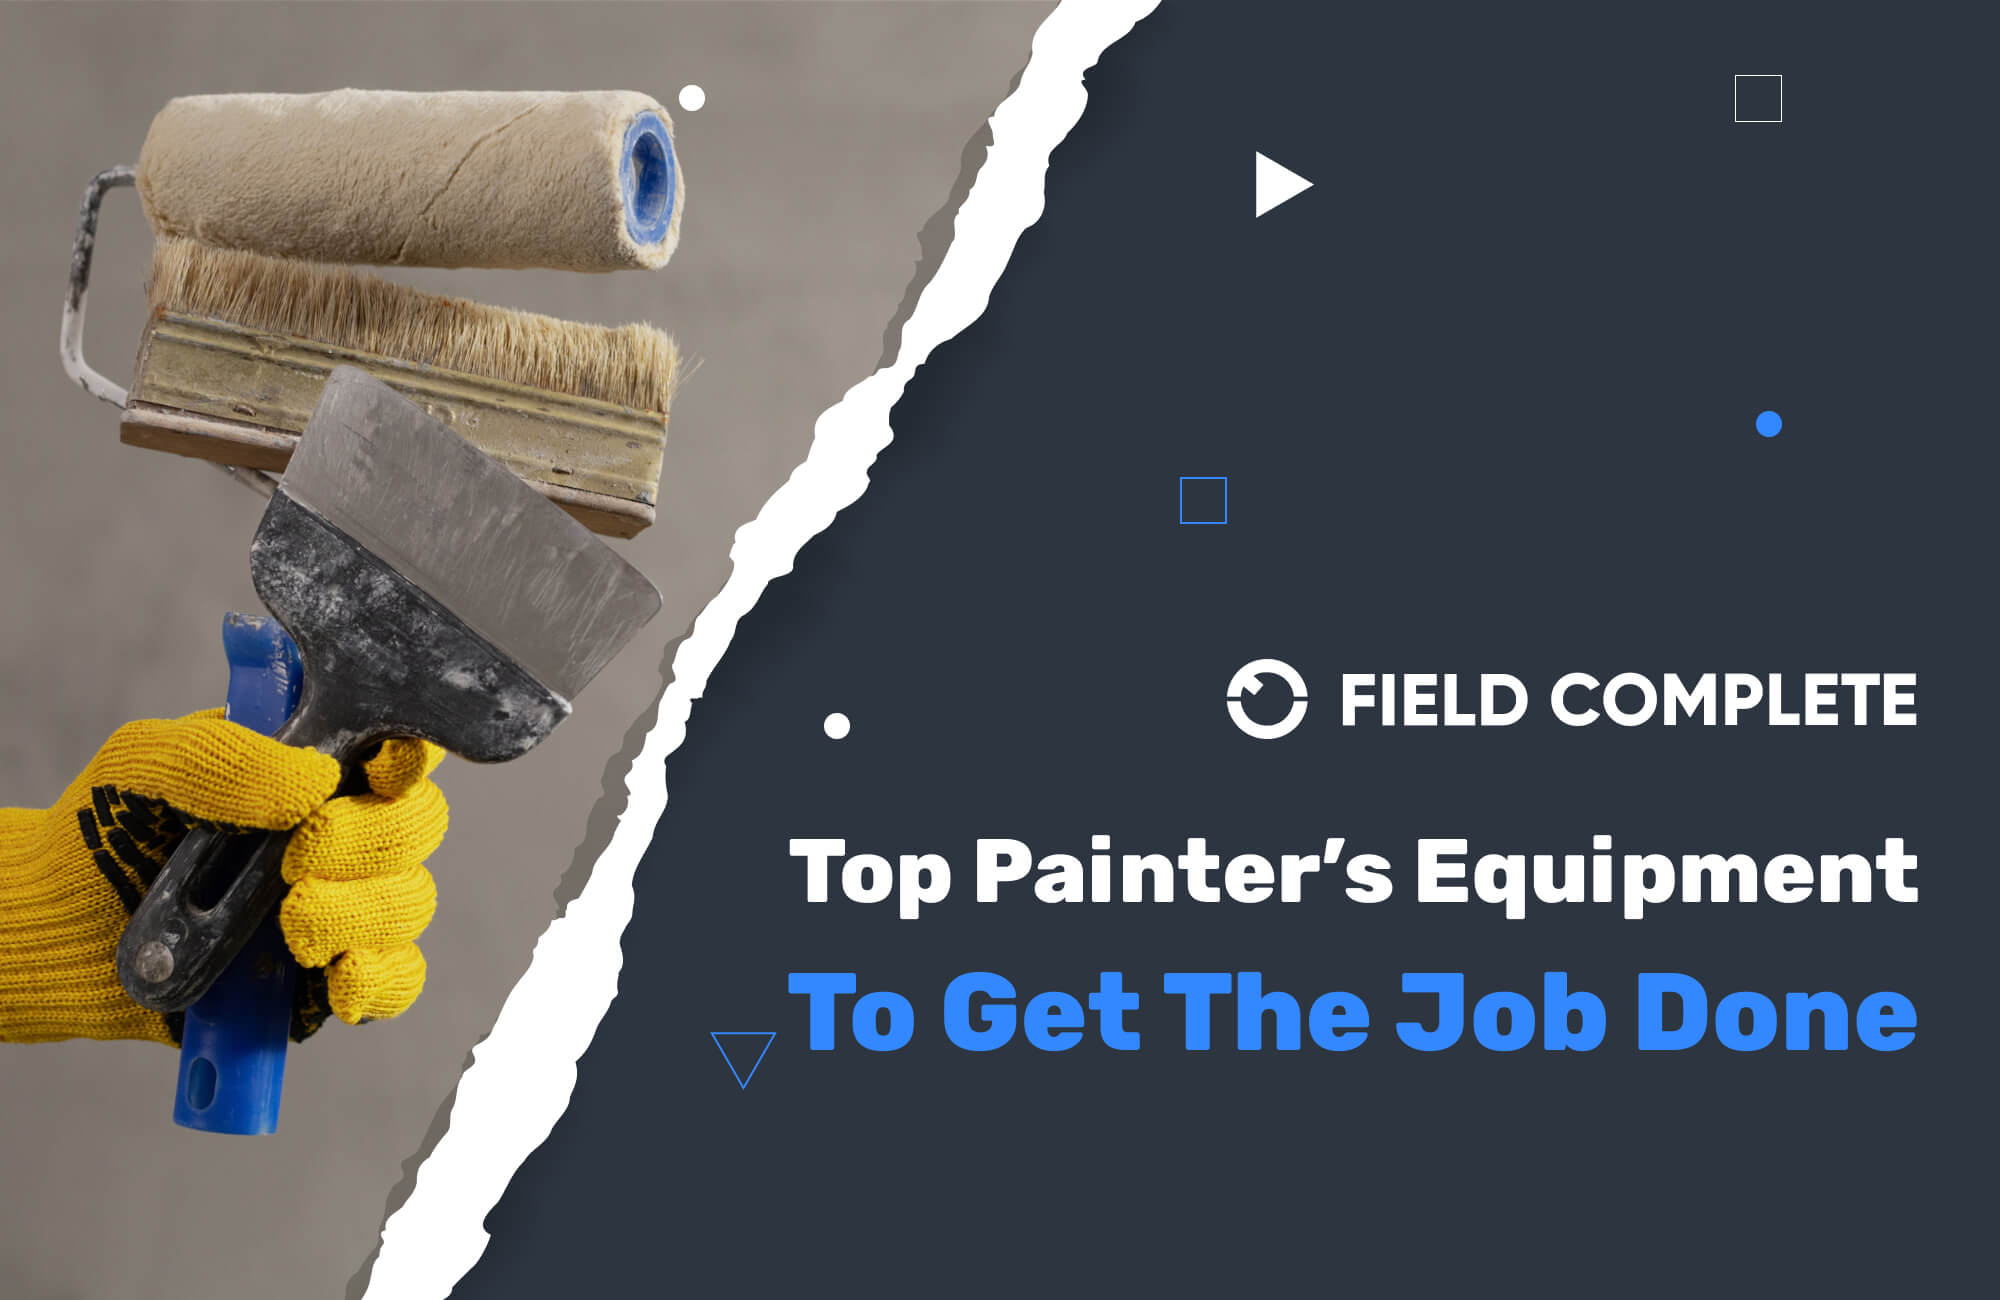 Top Painter’s Equipment To Get The Job Done